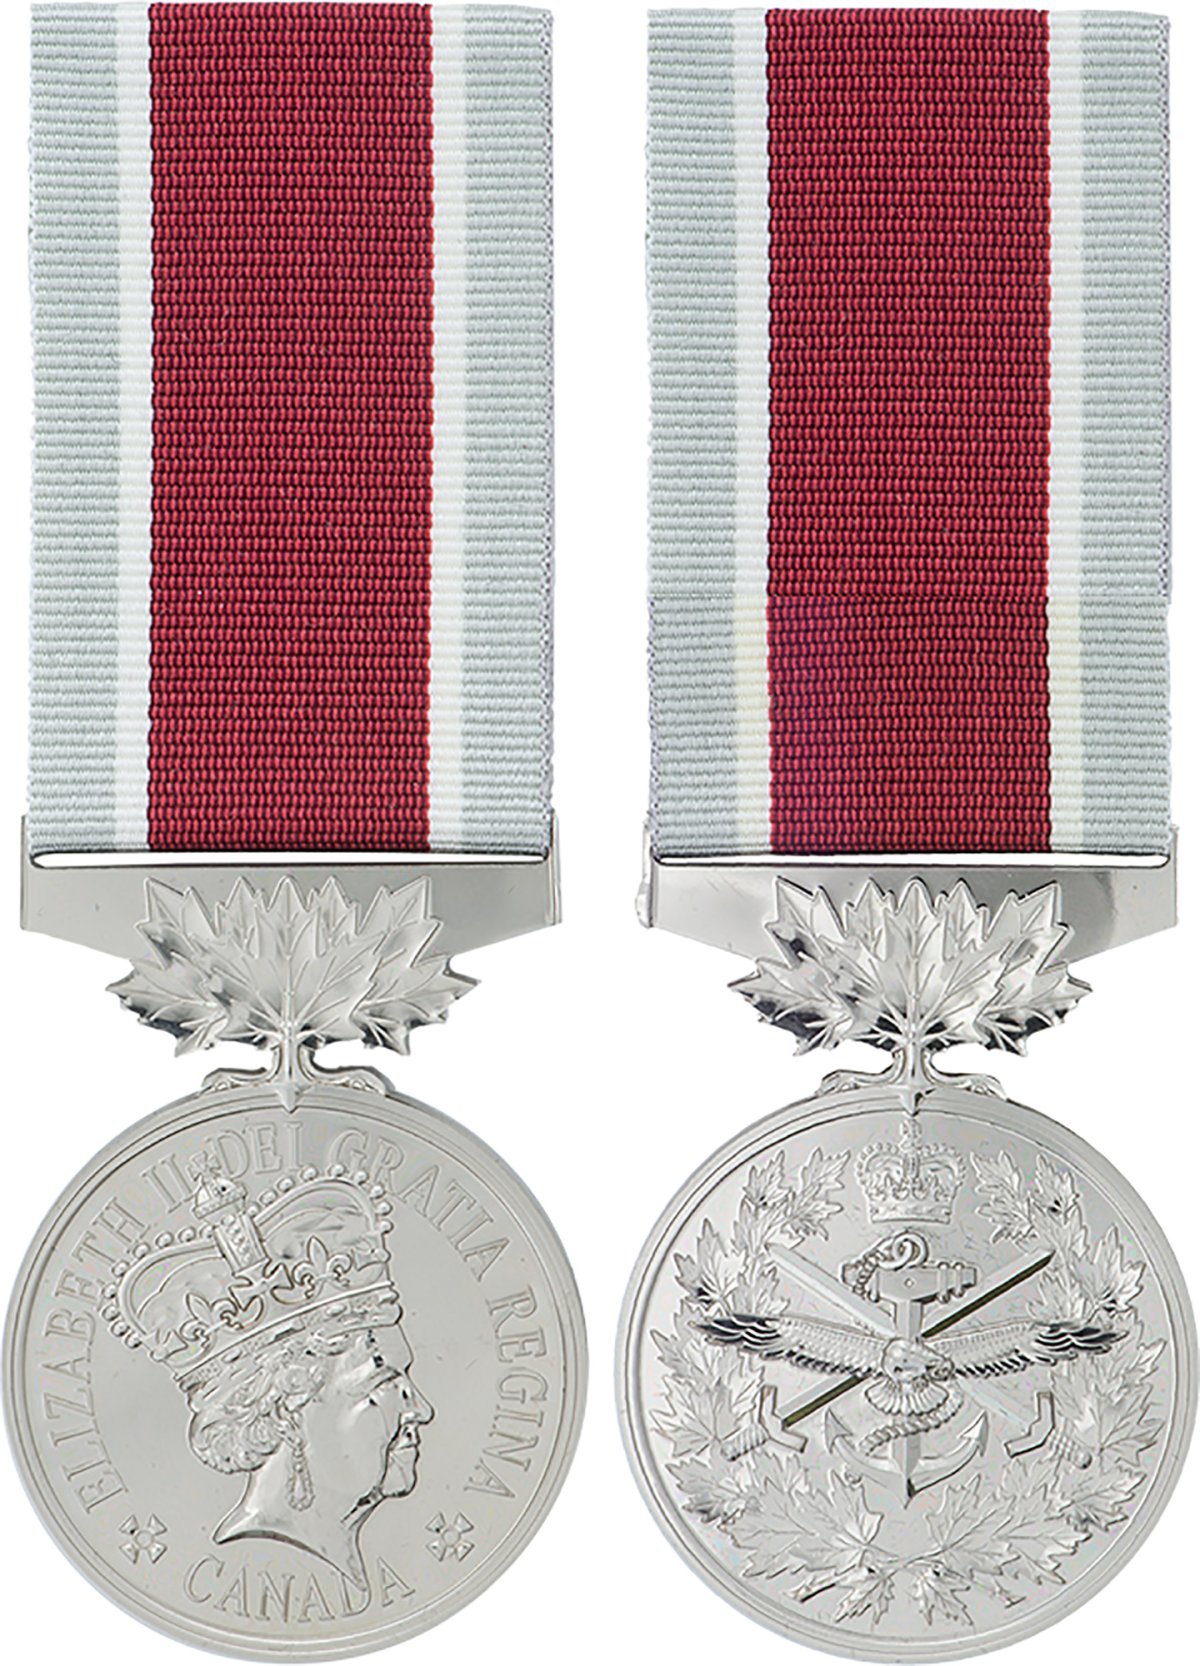 Kingston police are investigating the theft of Canadian Armed Forces medal and service coins theft in the city.